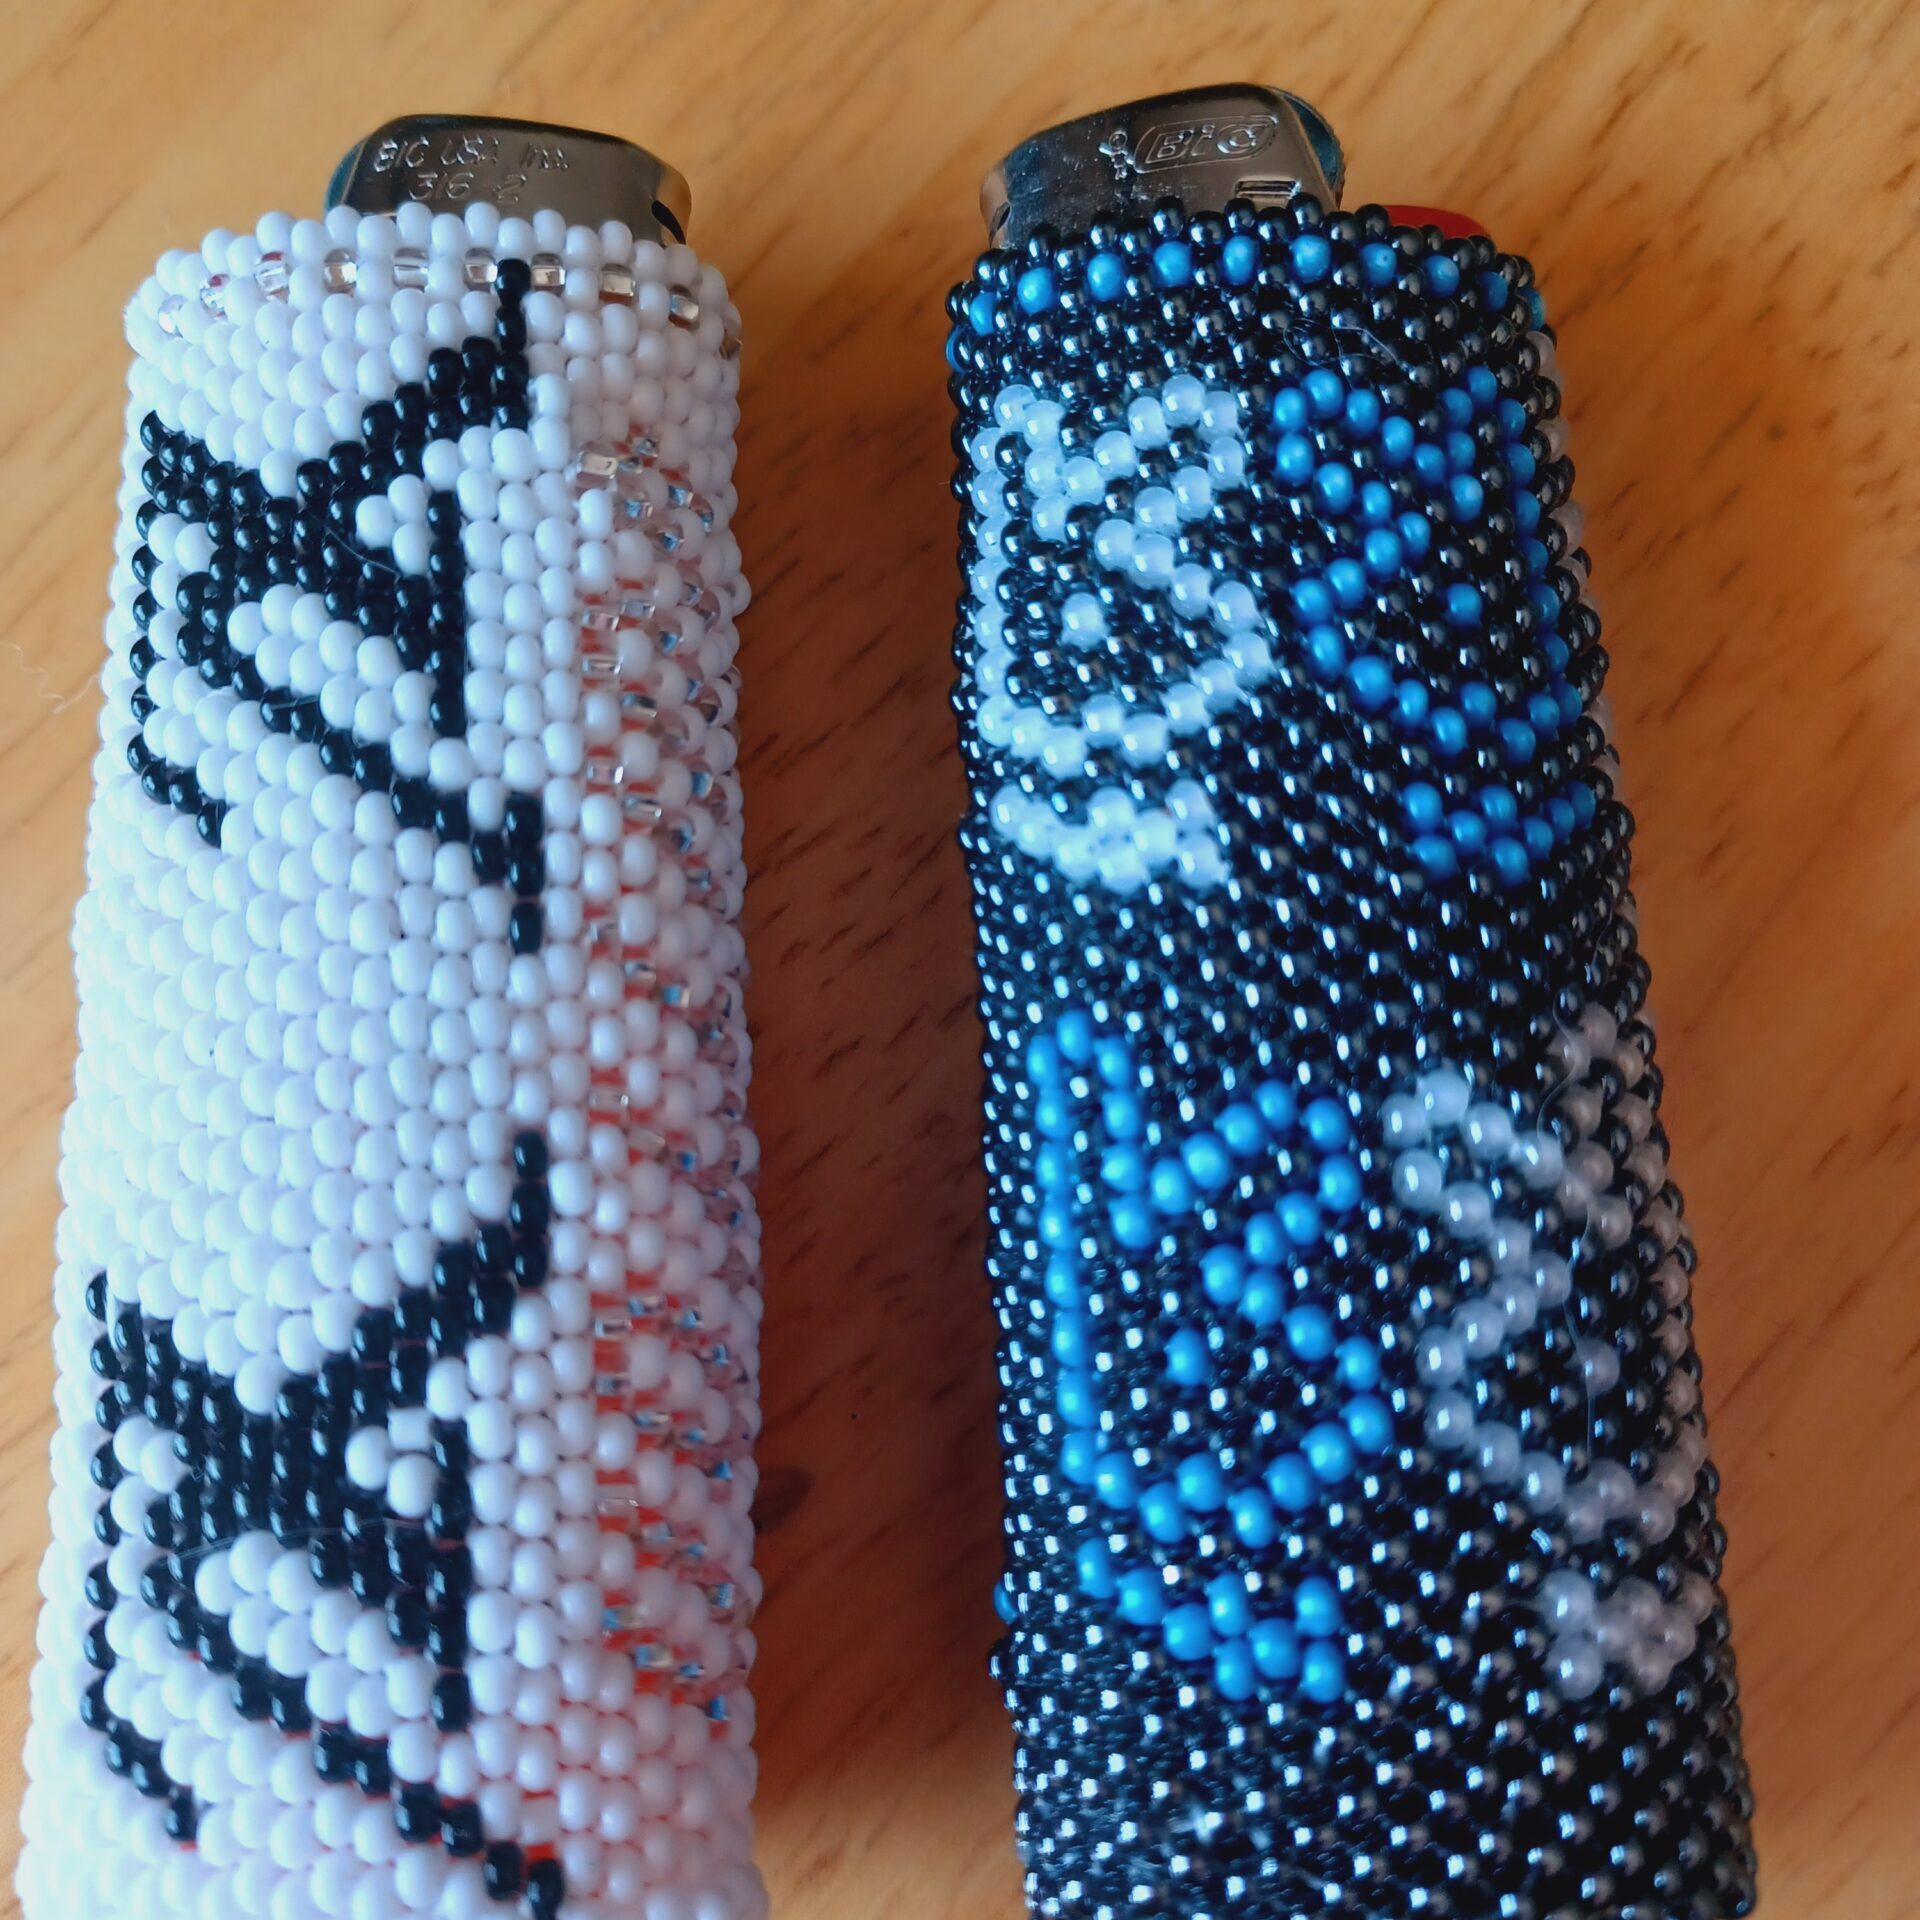 Amanda Lepine -Two Beaded Lighter Cases, one black with blue writing, the second white with black writing